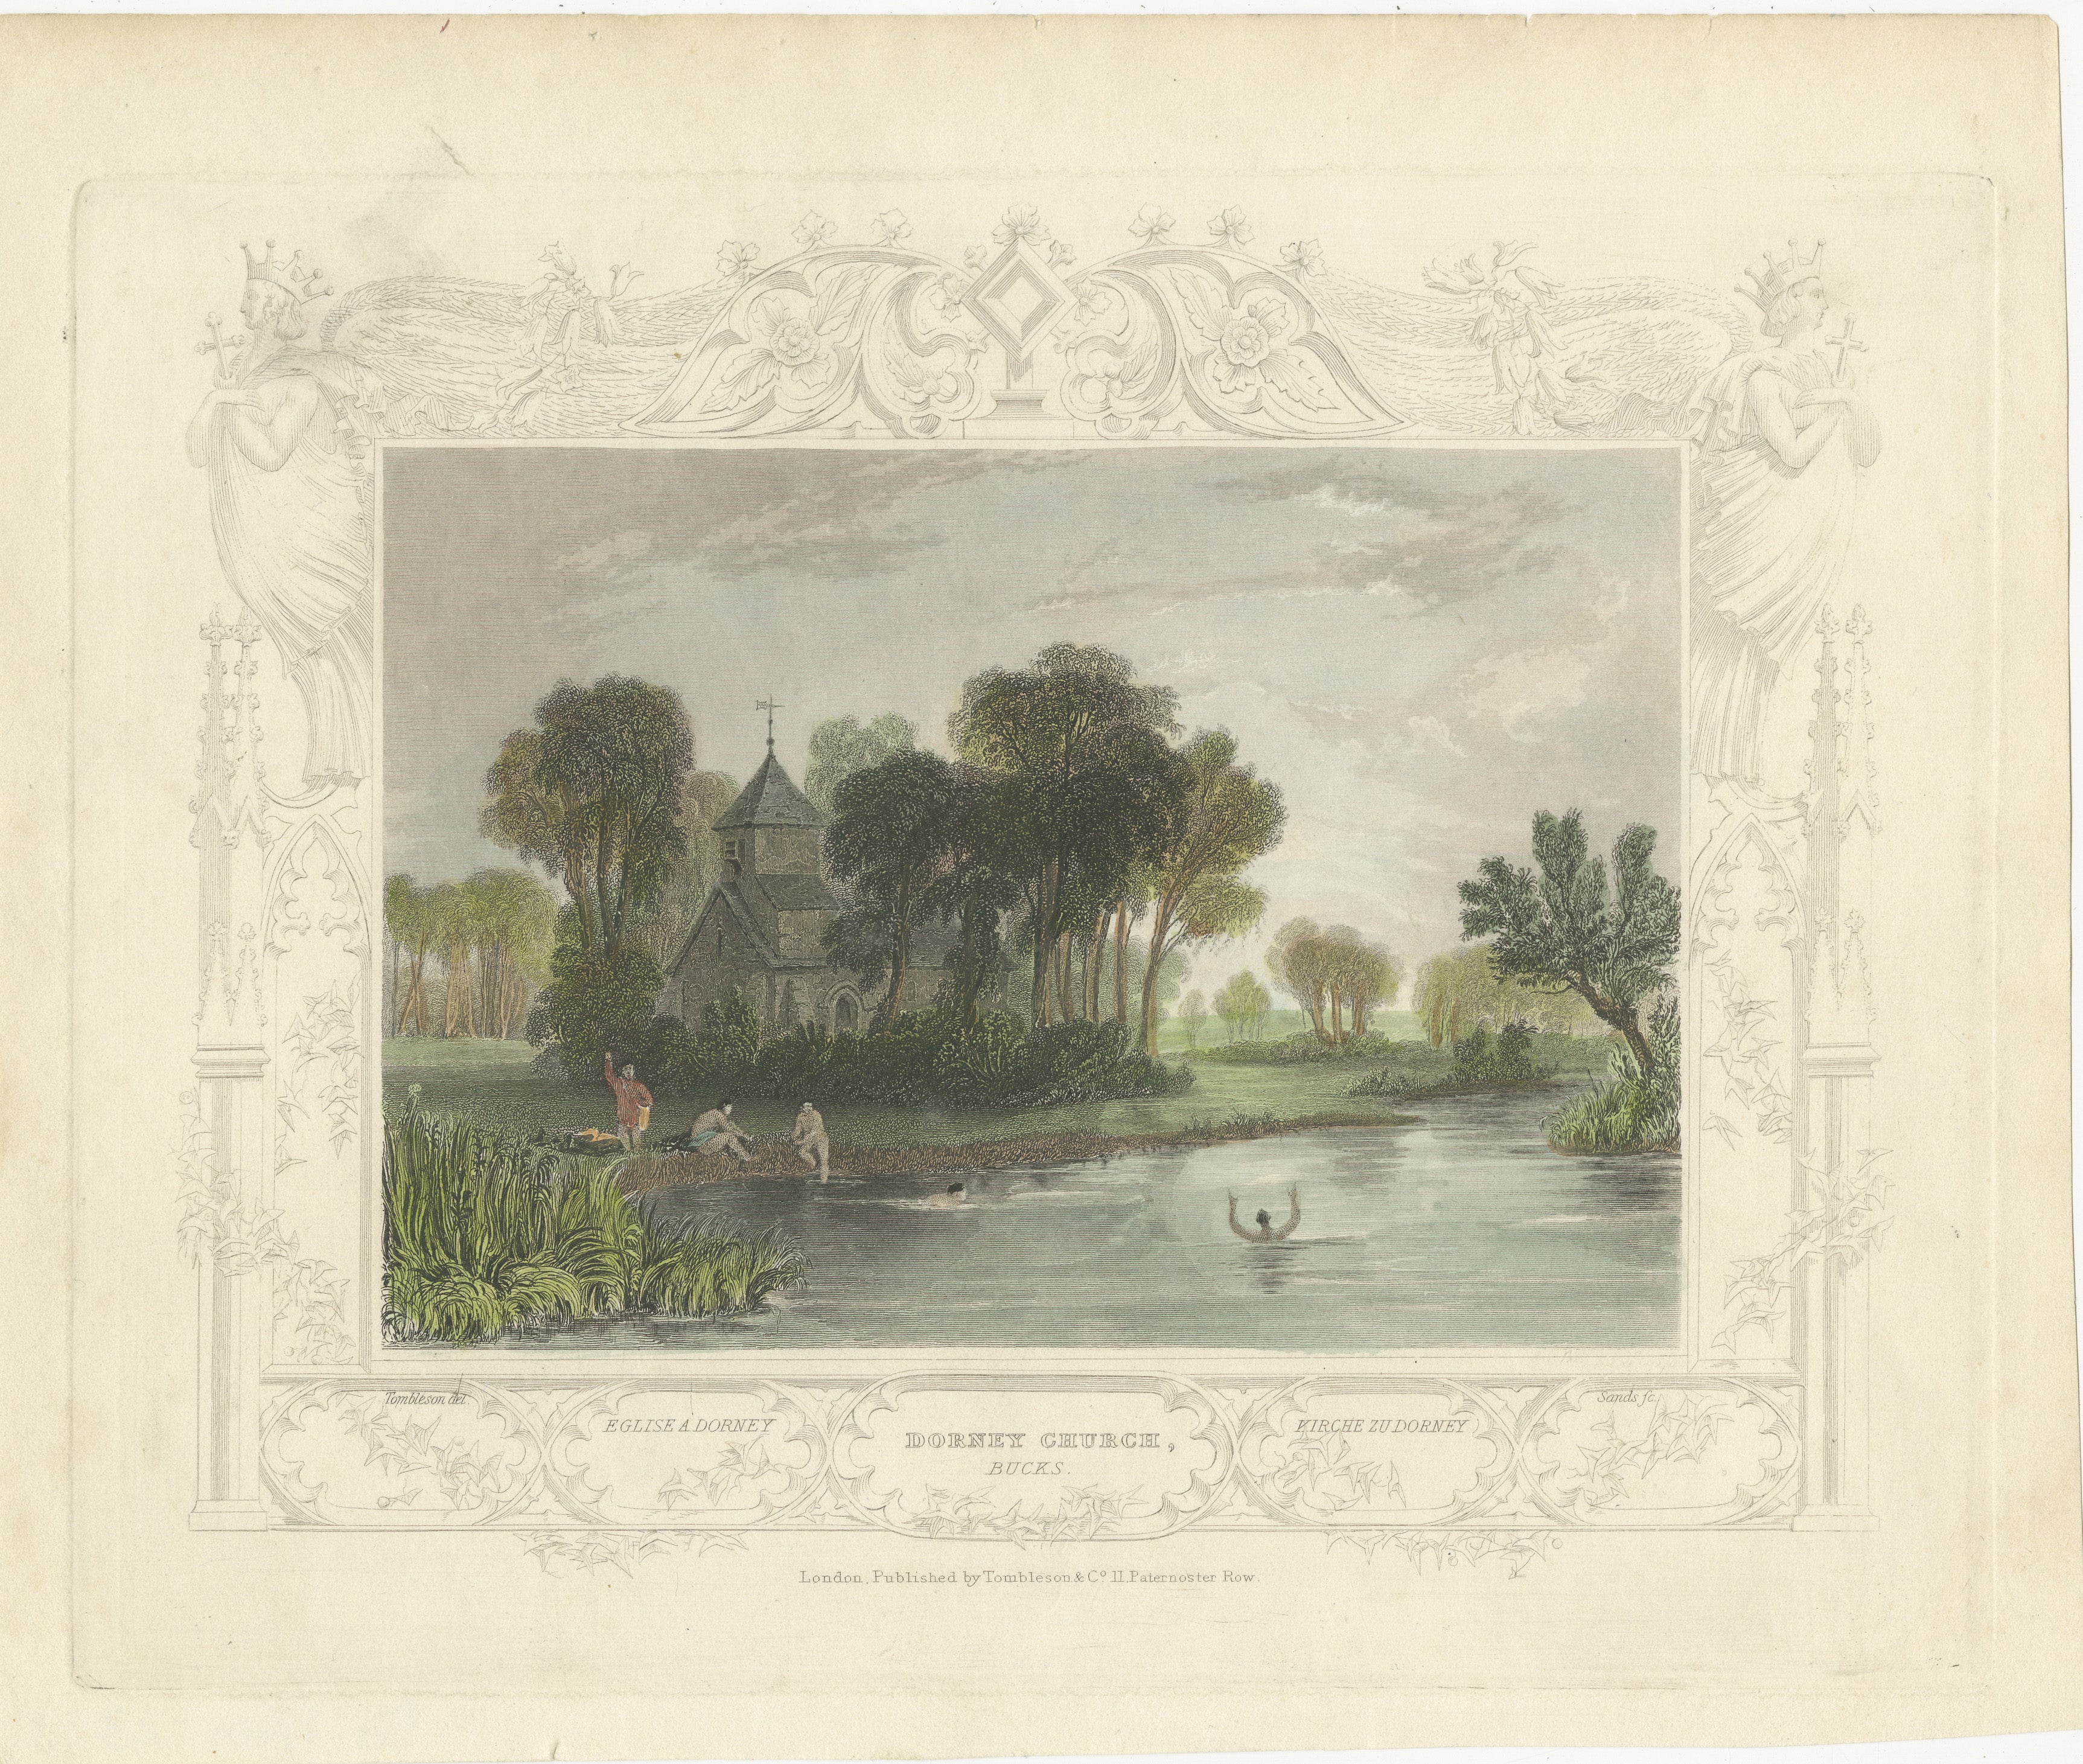 The image is an antique hand-colored steel plate engraving of Dorney Church in Buckinghamshire, England. 

It's by Tombleson & Co, a firm known for producing prints in London during the 1830s. This original artwork features a charming country scene